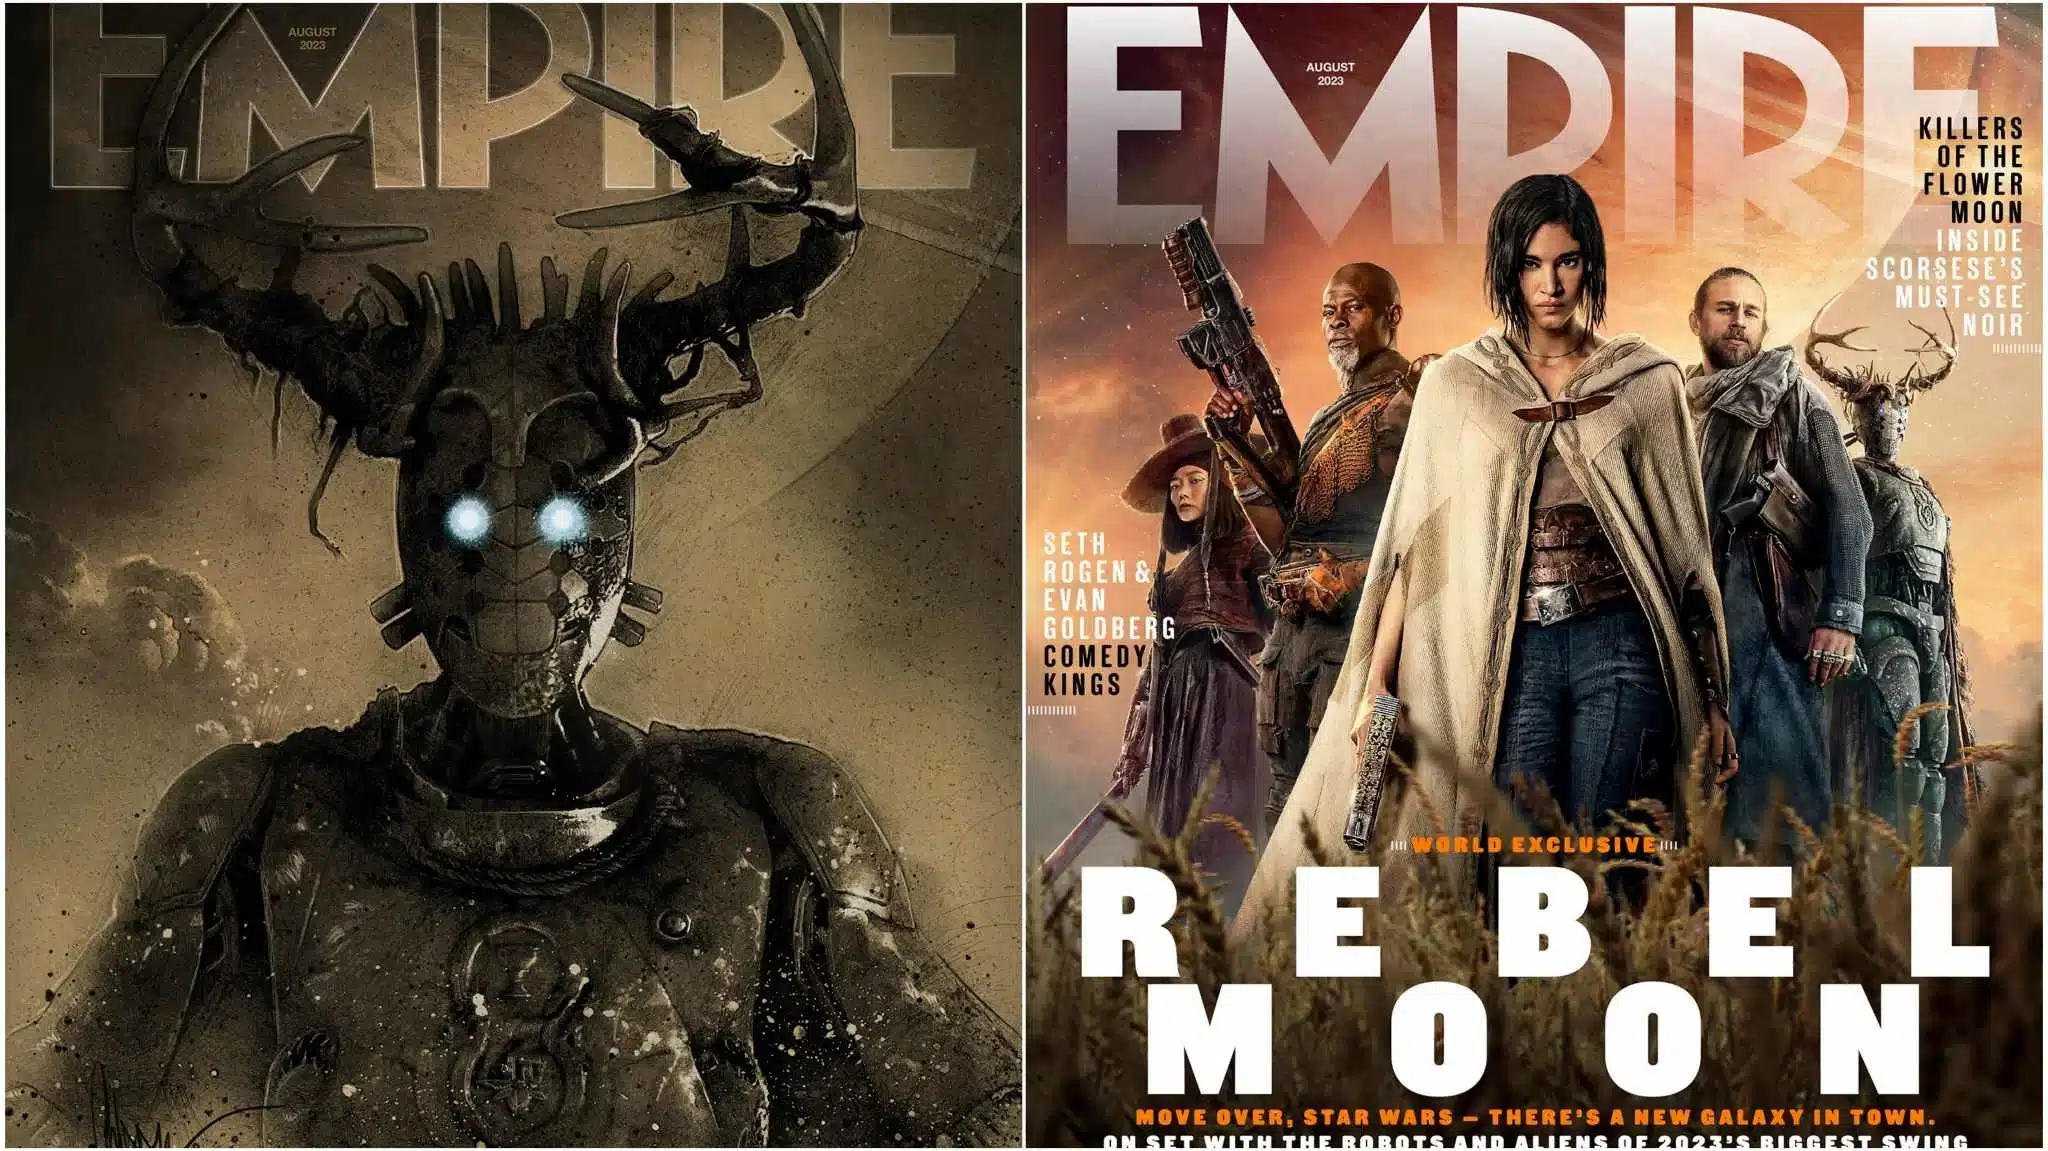 Rebel Moon': Zack Snyder's sci-fi project meets 'Star Wars', 'Dune' action;  sets release date for sequel - Entertainment